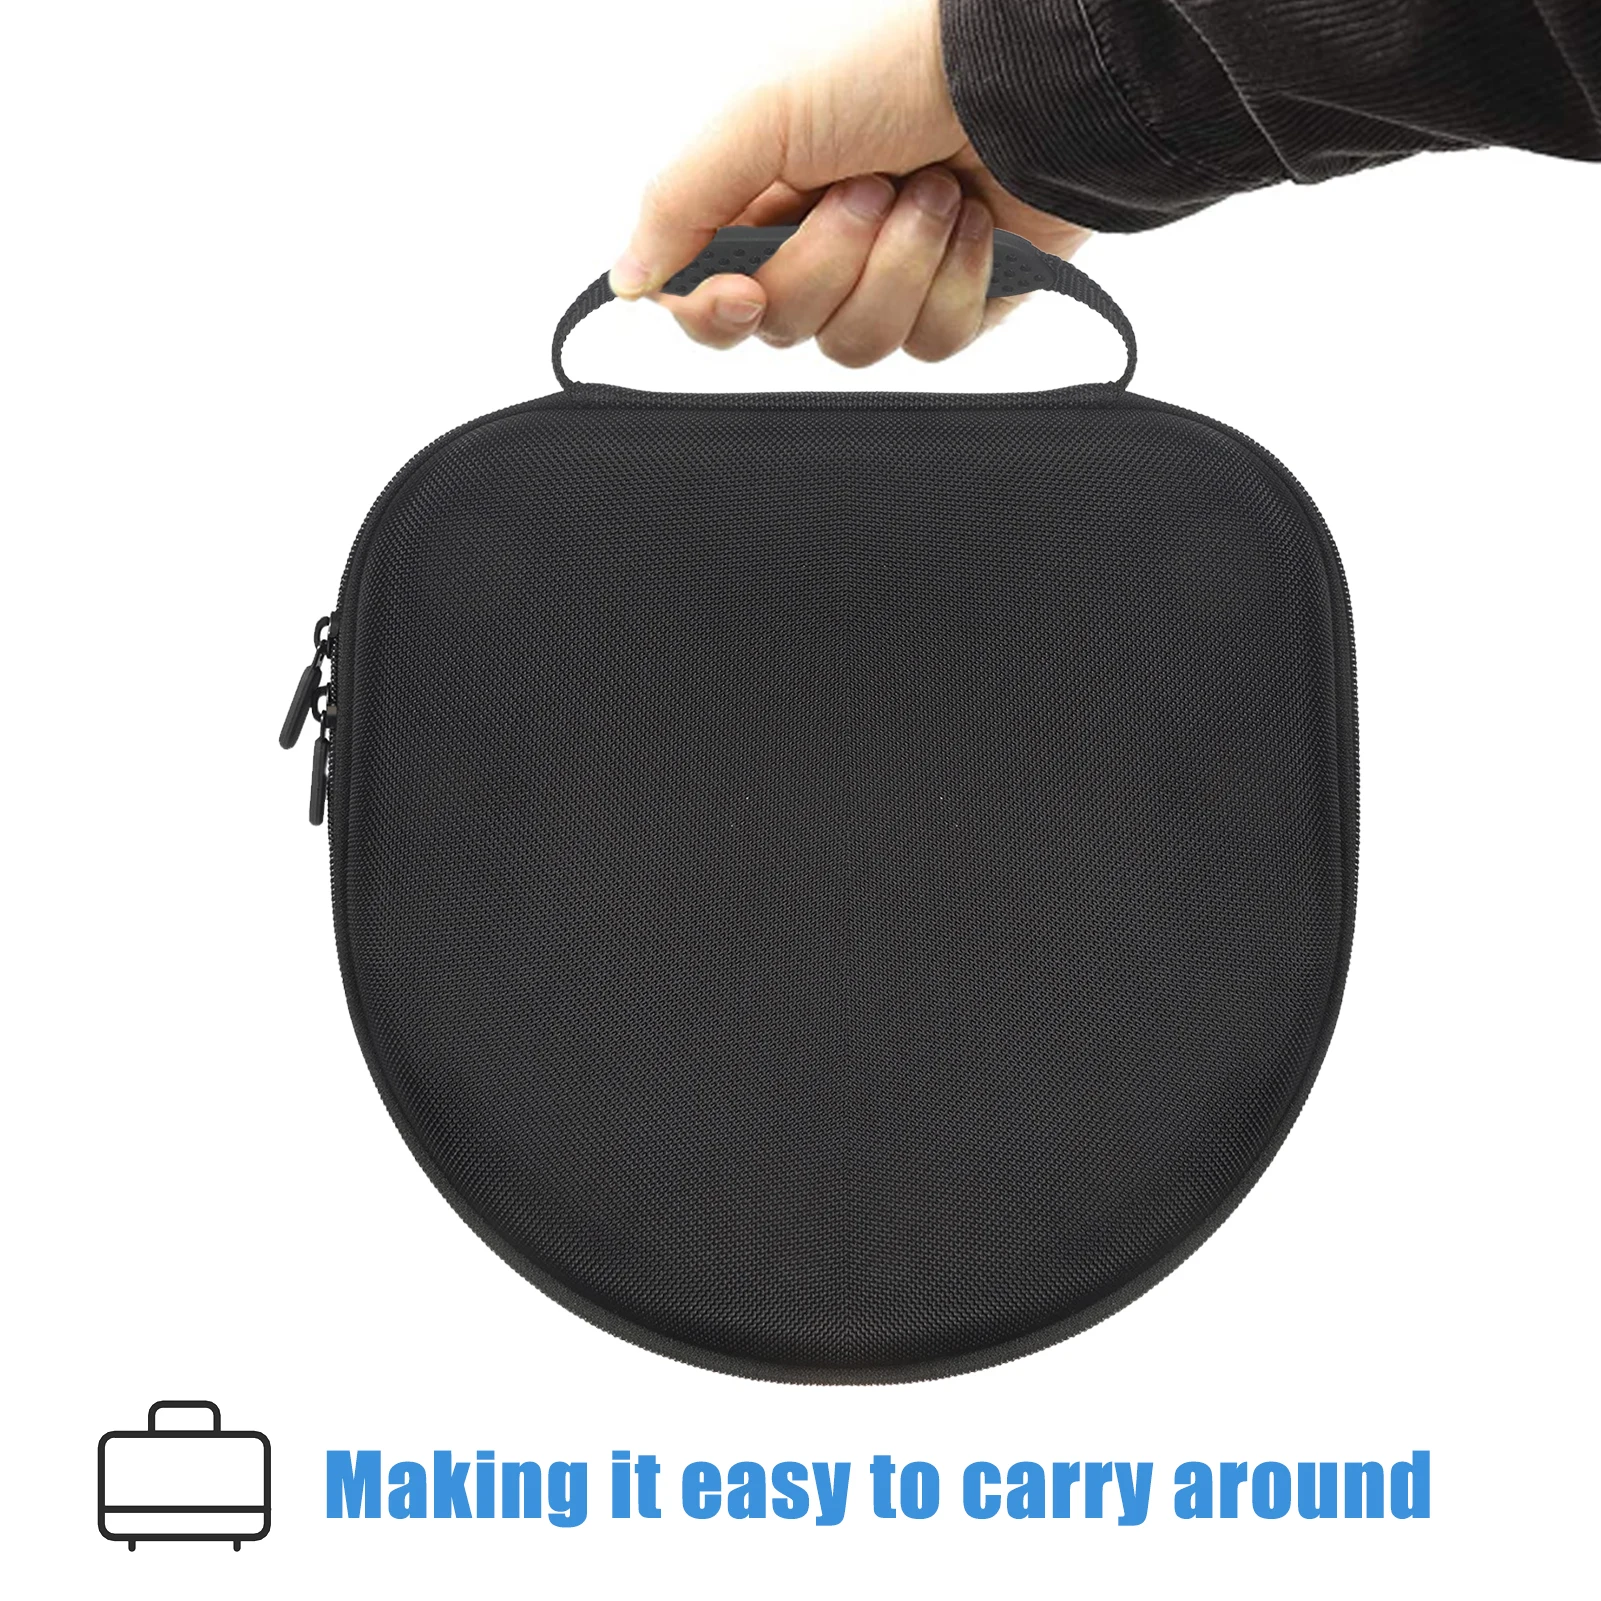 Headphone Storage Bag For AirPods Max Portable Shockproof Anti-fall Dustproof Travel Carrying Case Headset Cover Zipper Box enlarge